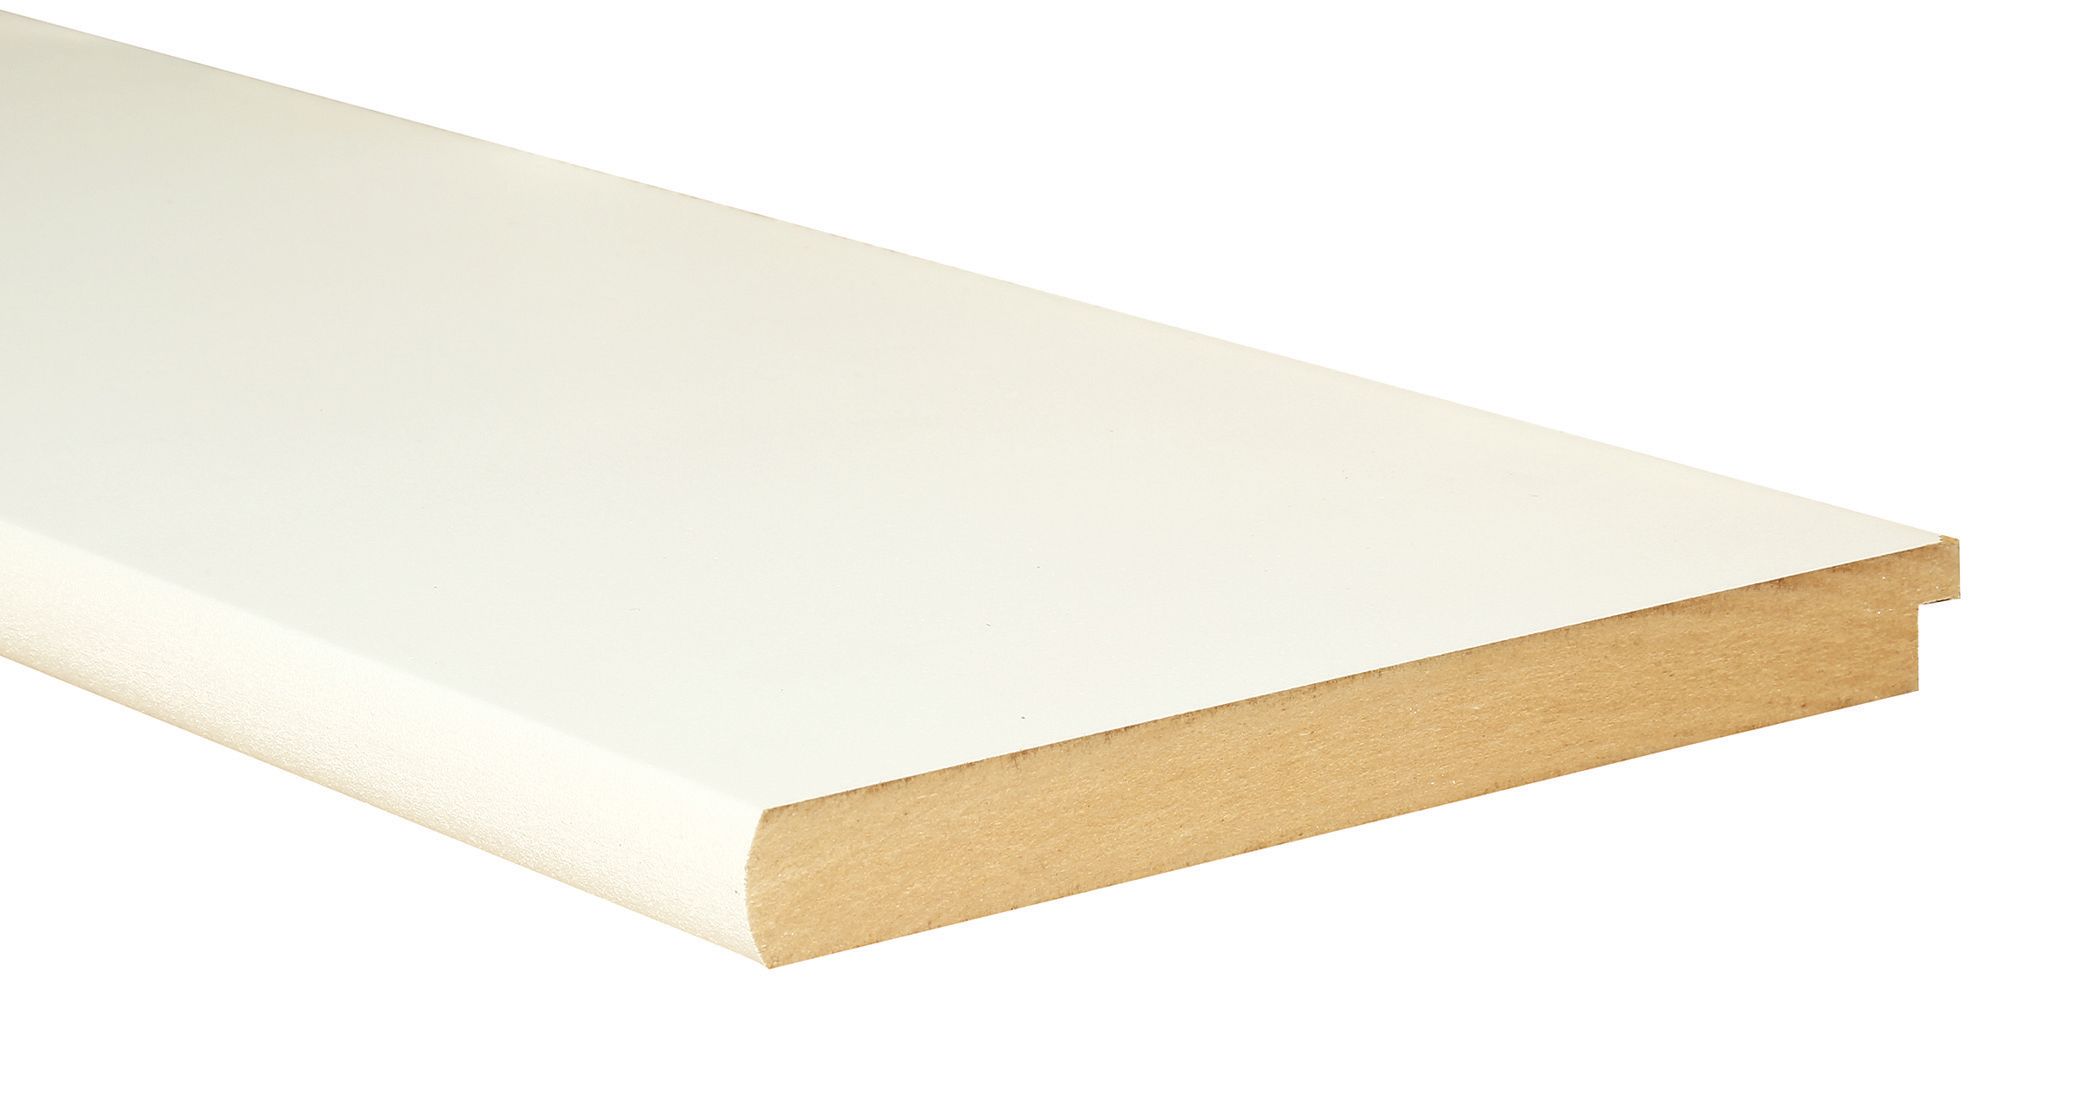 Image of Wickes Bullnose Primed MDF Window Board - 22mm x 219mm x 1500mm